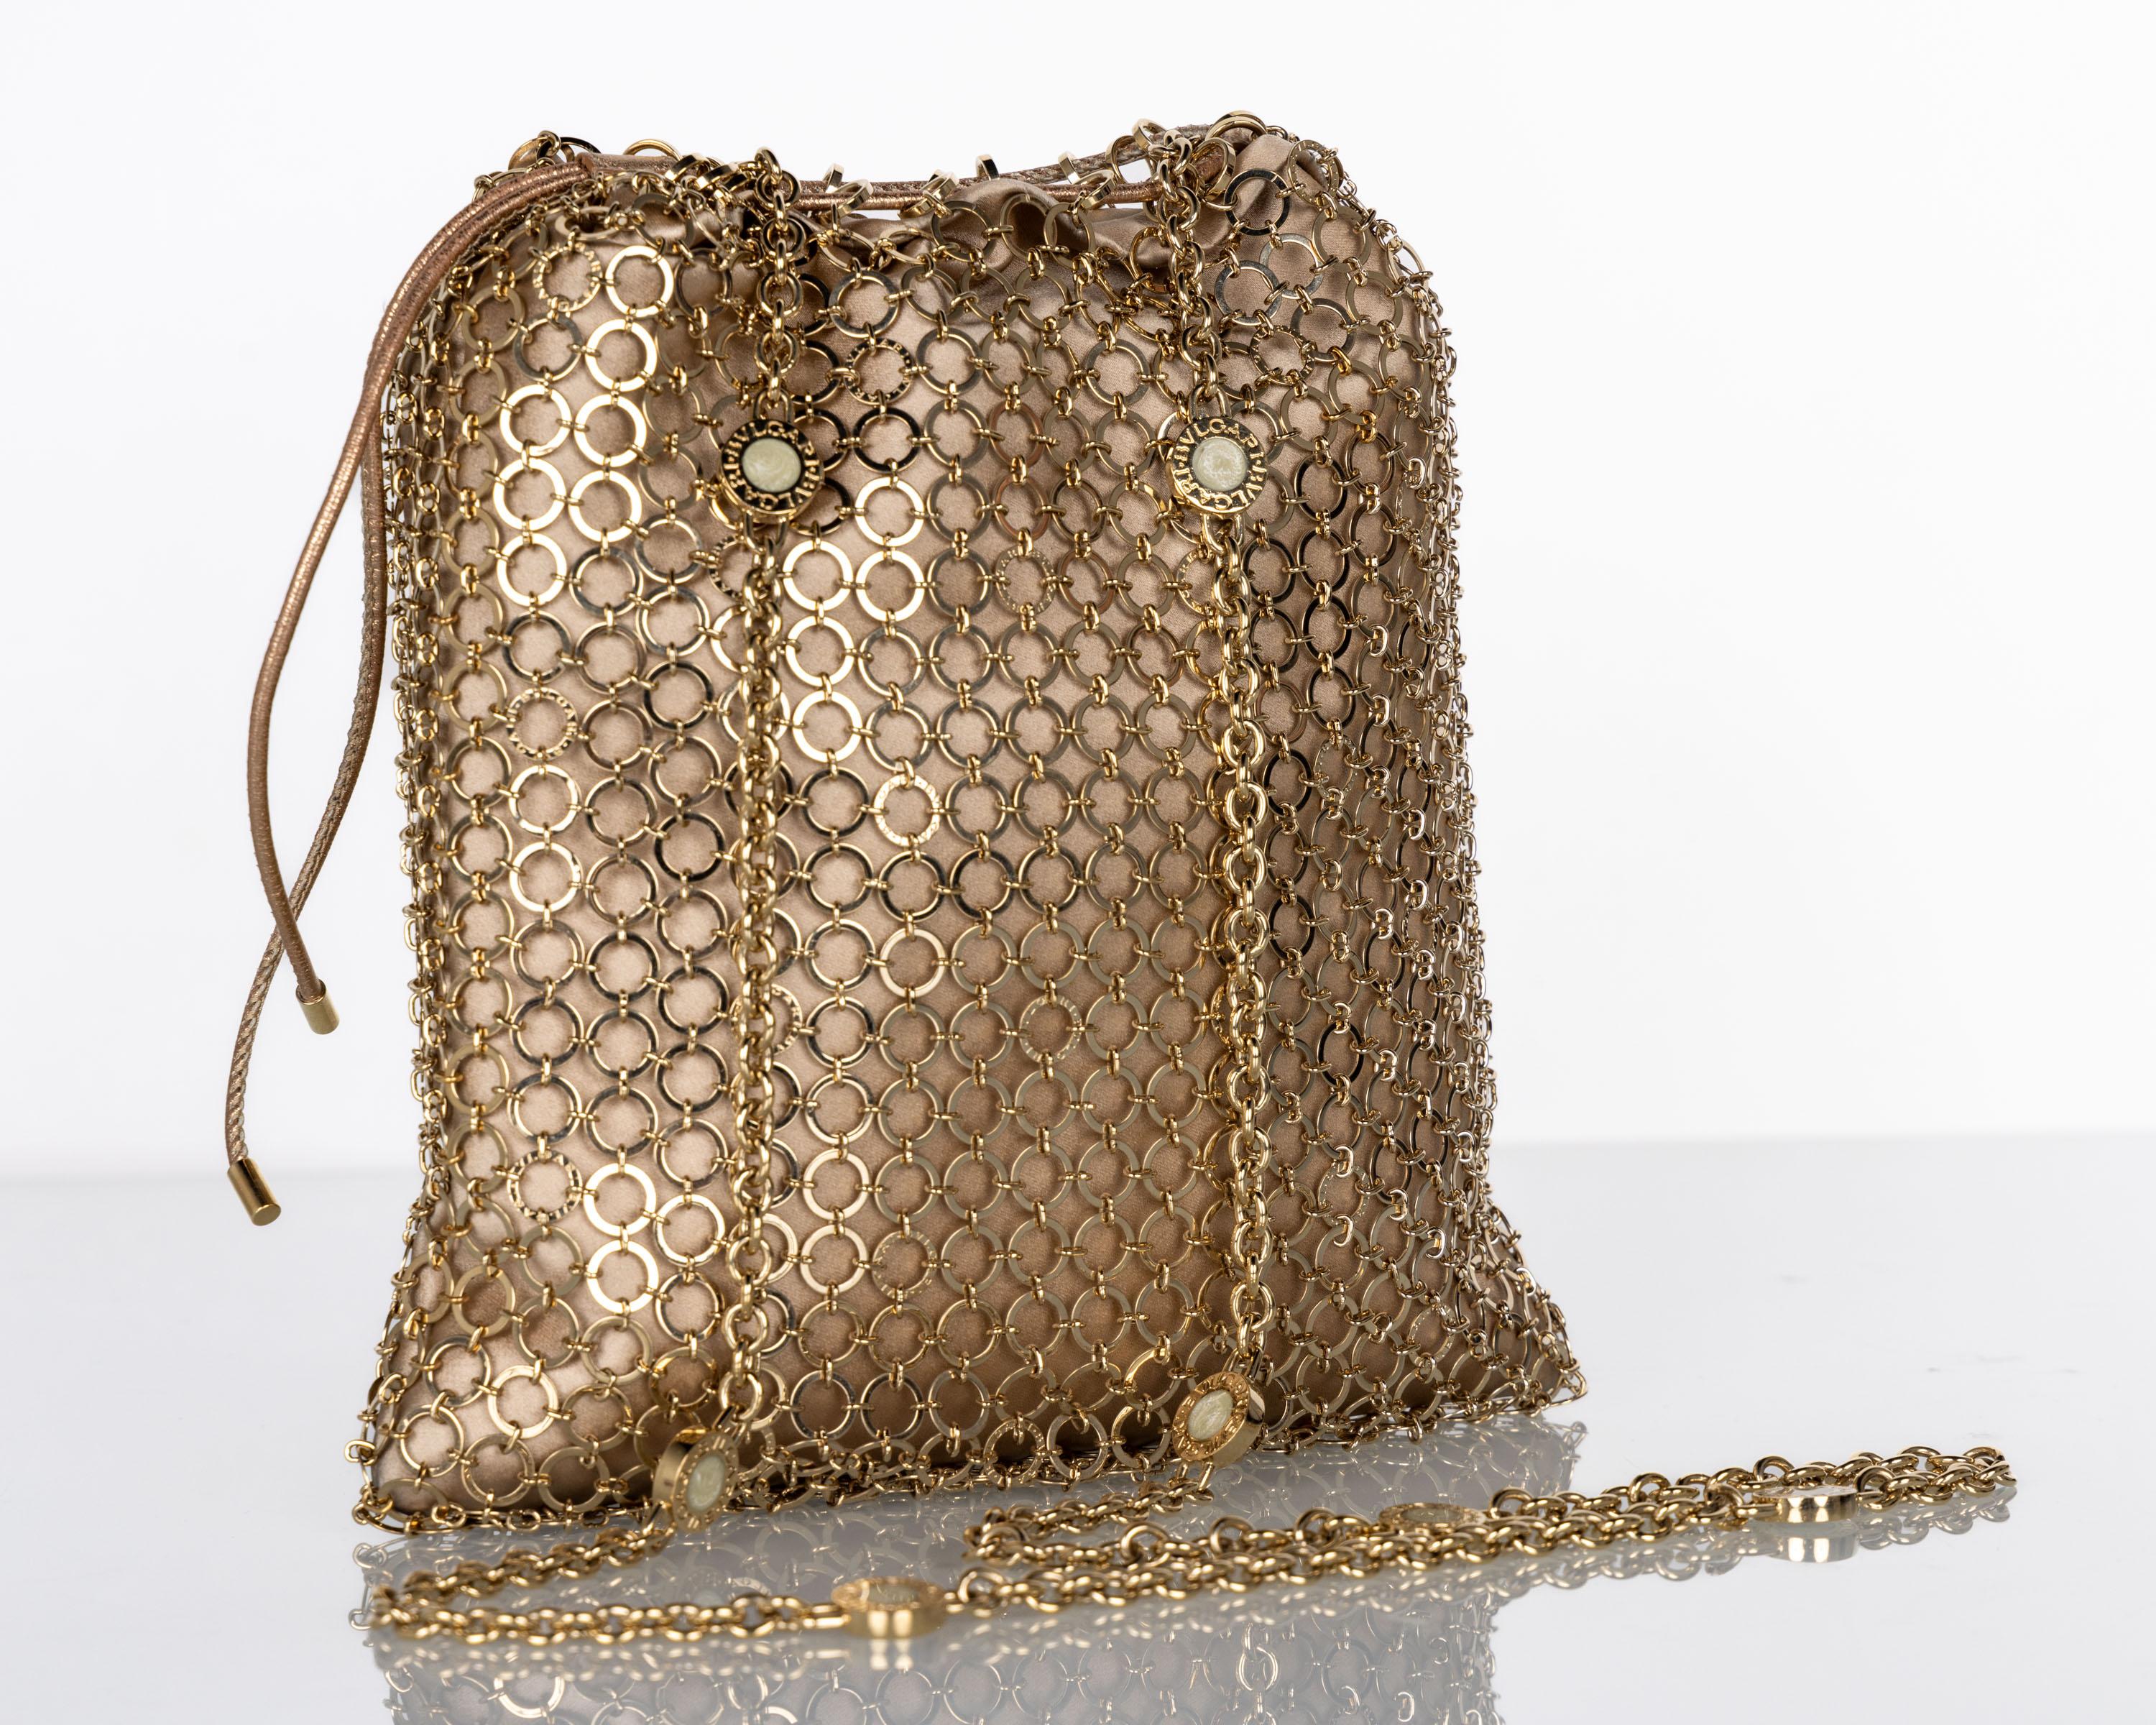 Bulgari—stylized as BVLGARI— was founded in 1884 by Sotir Bulgari in Rome. Unlike many luxury brands, Bulgari curates luxury across several markets and is also most noted for their bag designs 
This Bulgari gold mesh cross body/ shoulder bag is done